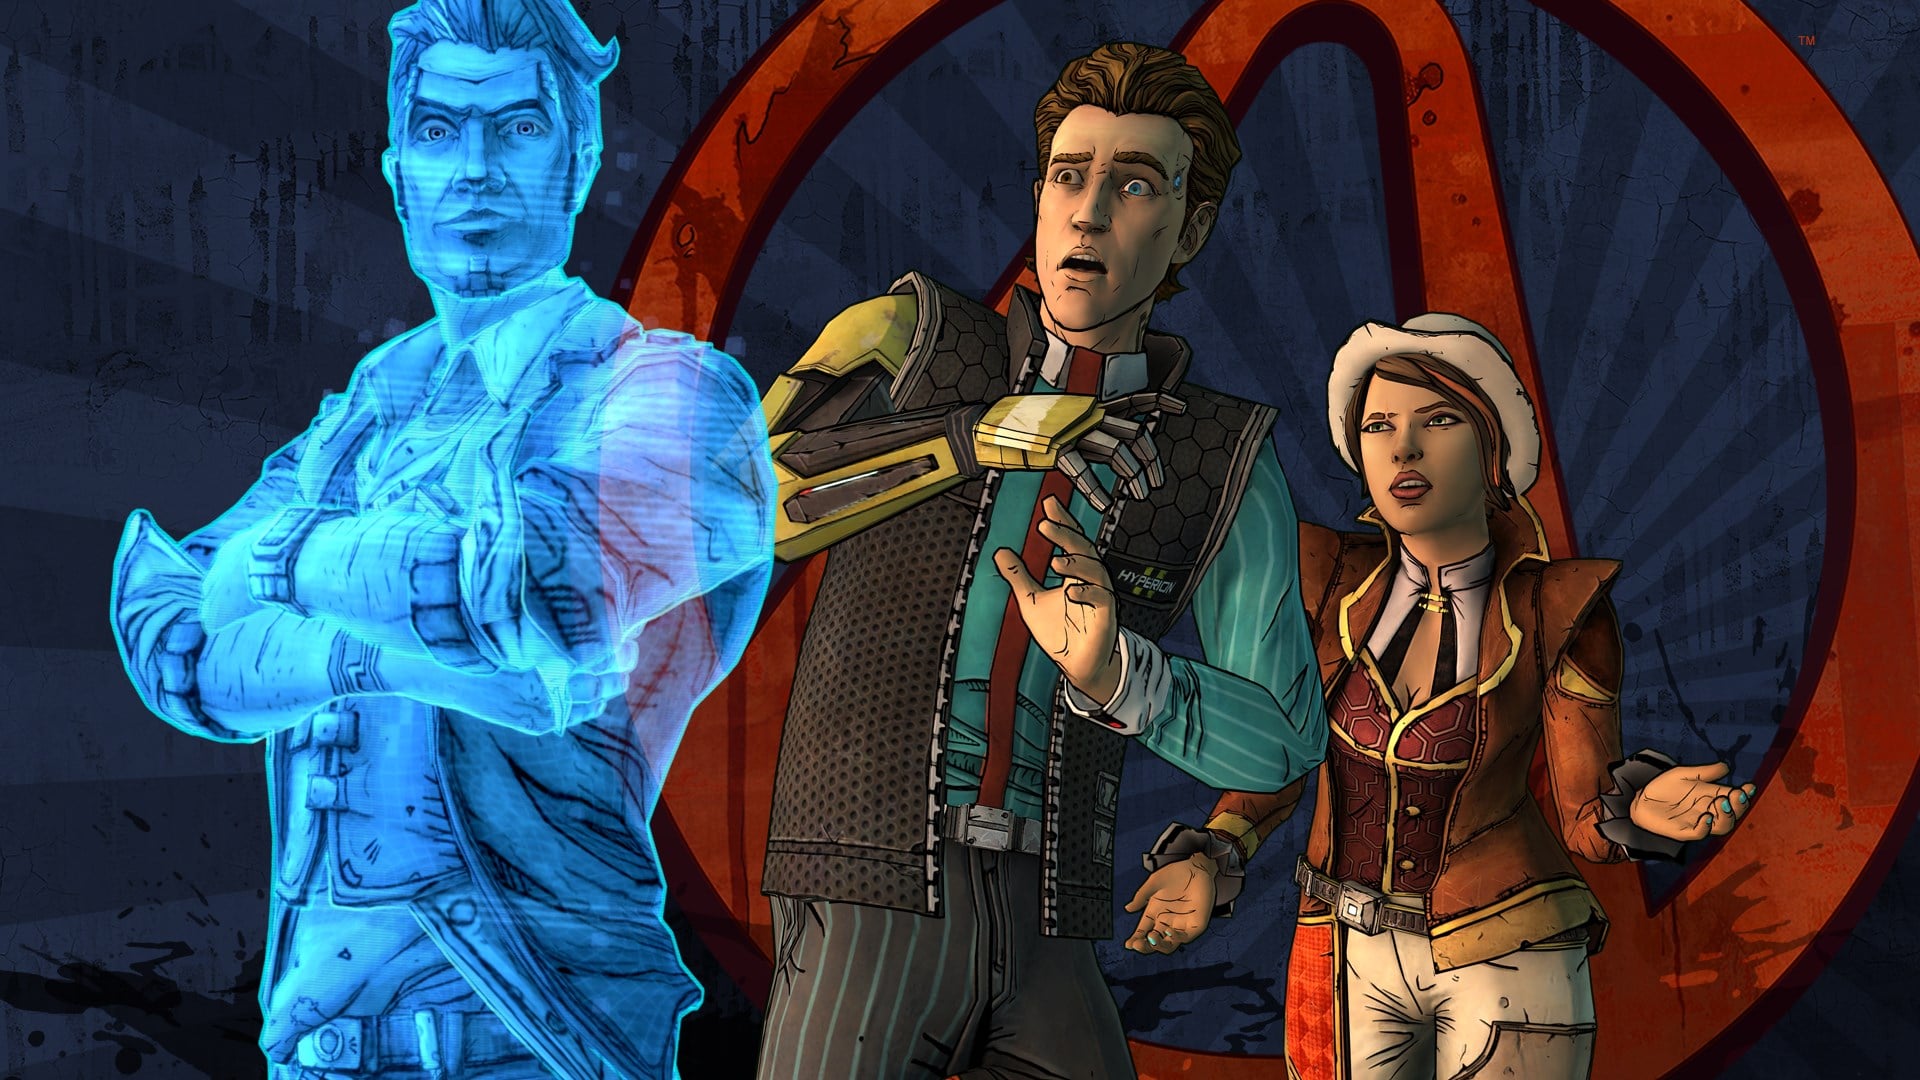 Tales from the borderlands illustration avec les personnages